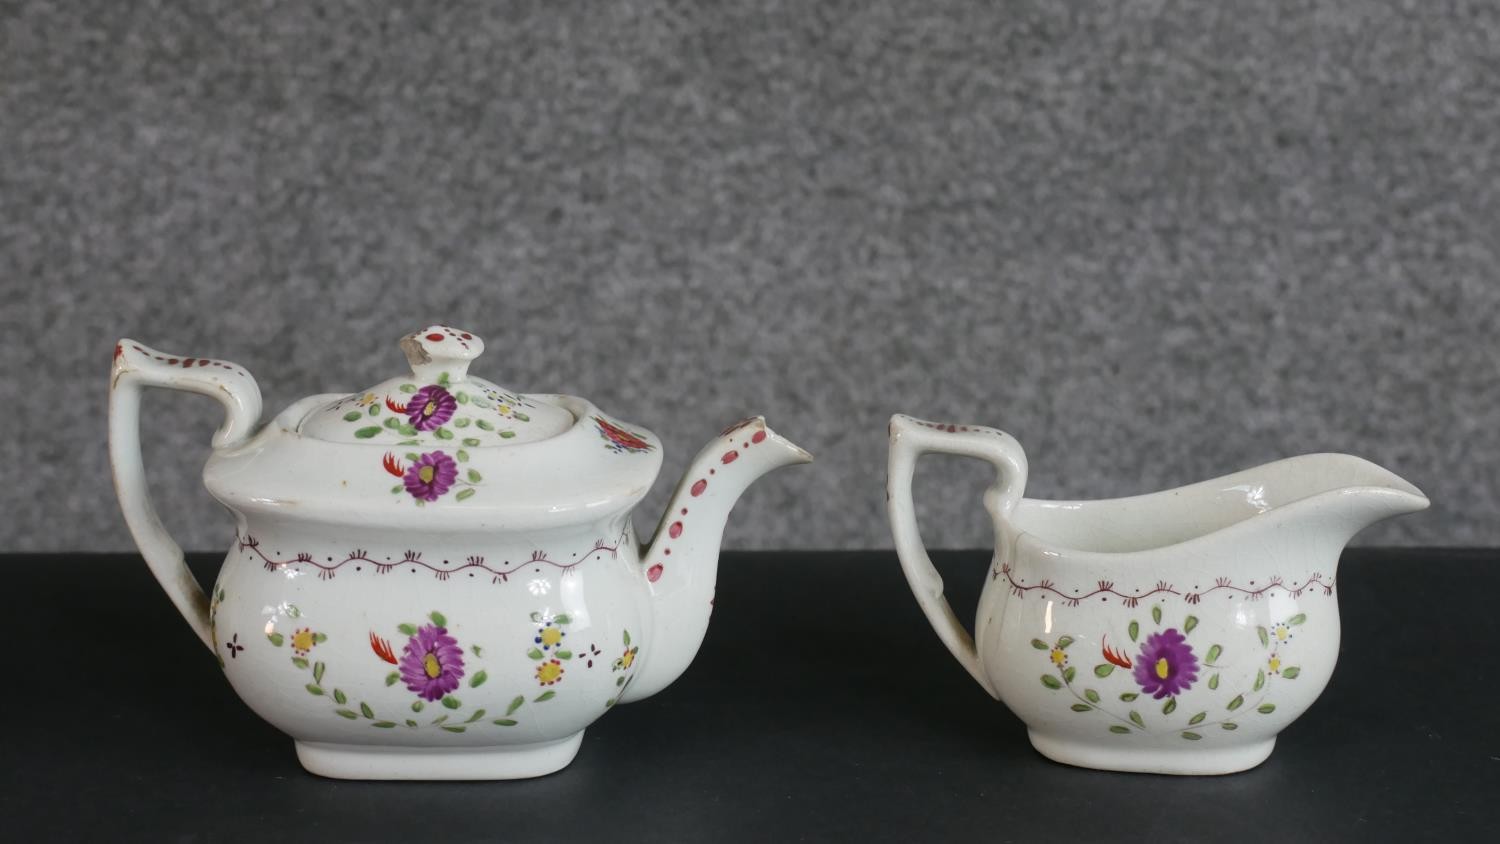 A 19th century floral design hand-painted ceramic dolls tea set for four people (one cup missing), - Image 2 of 8